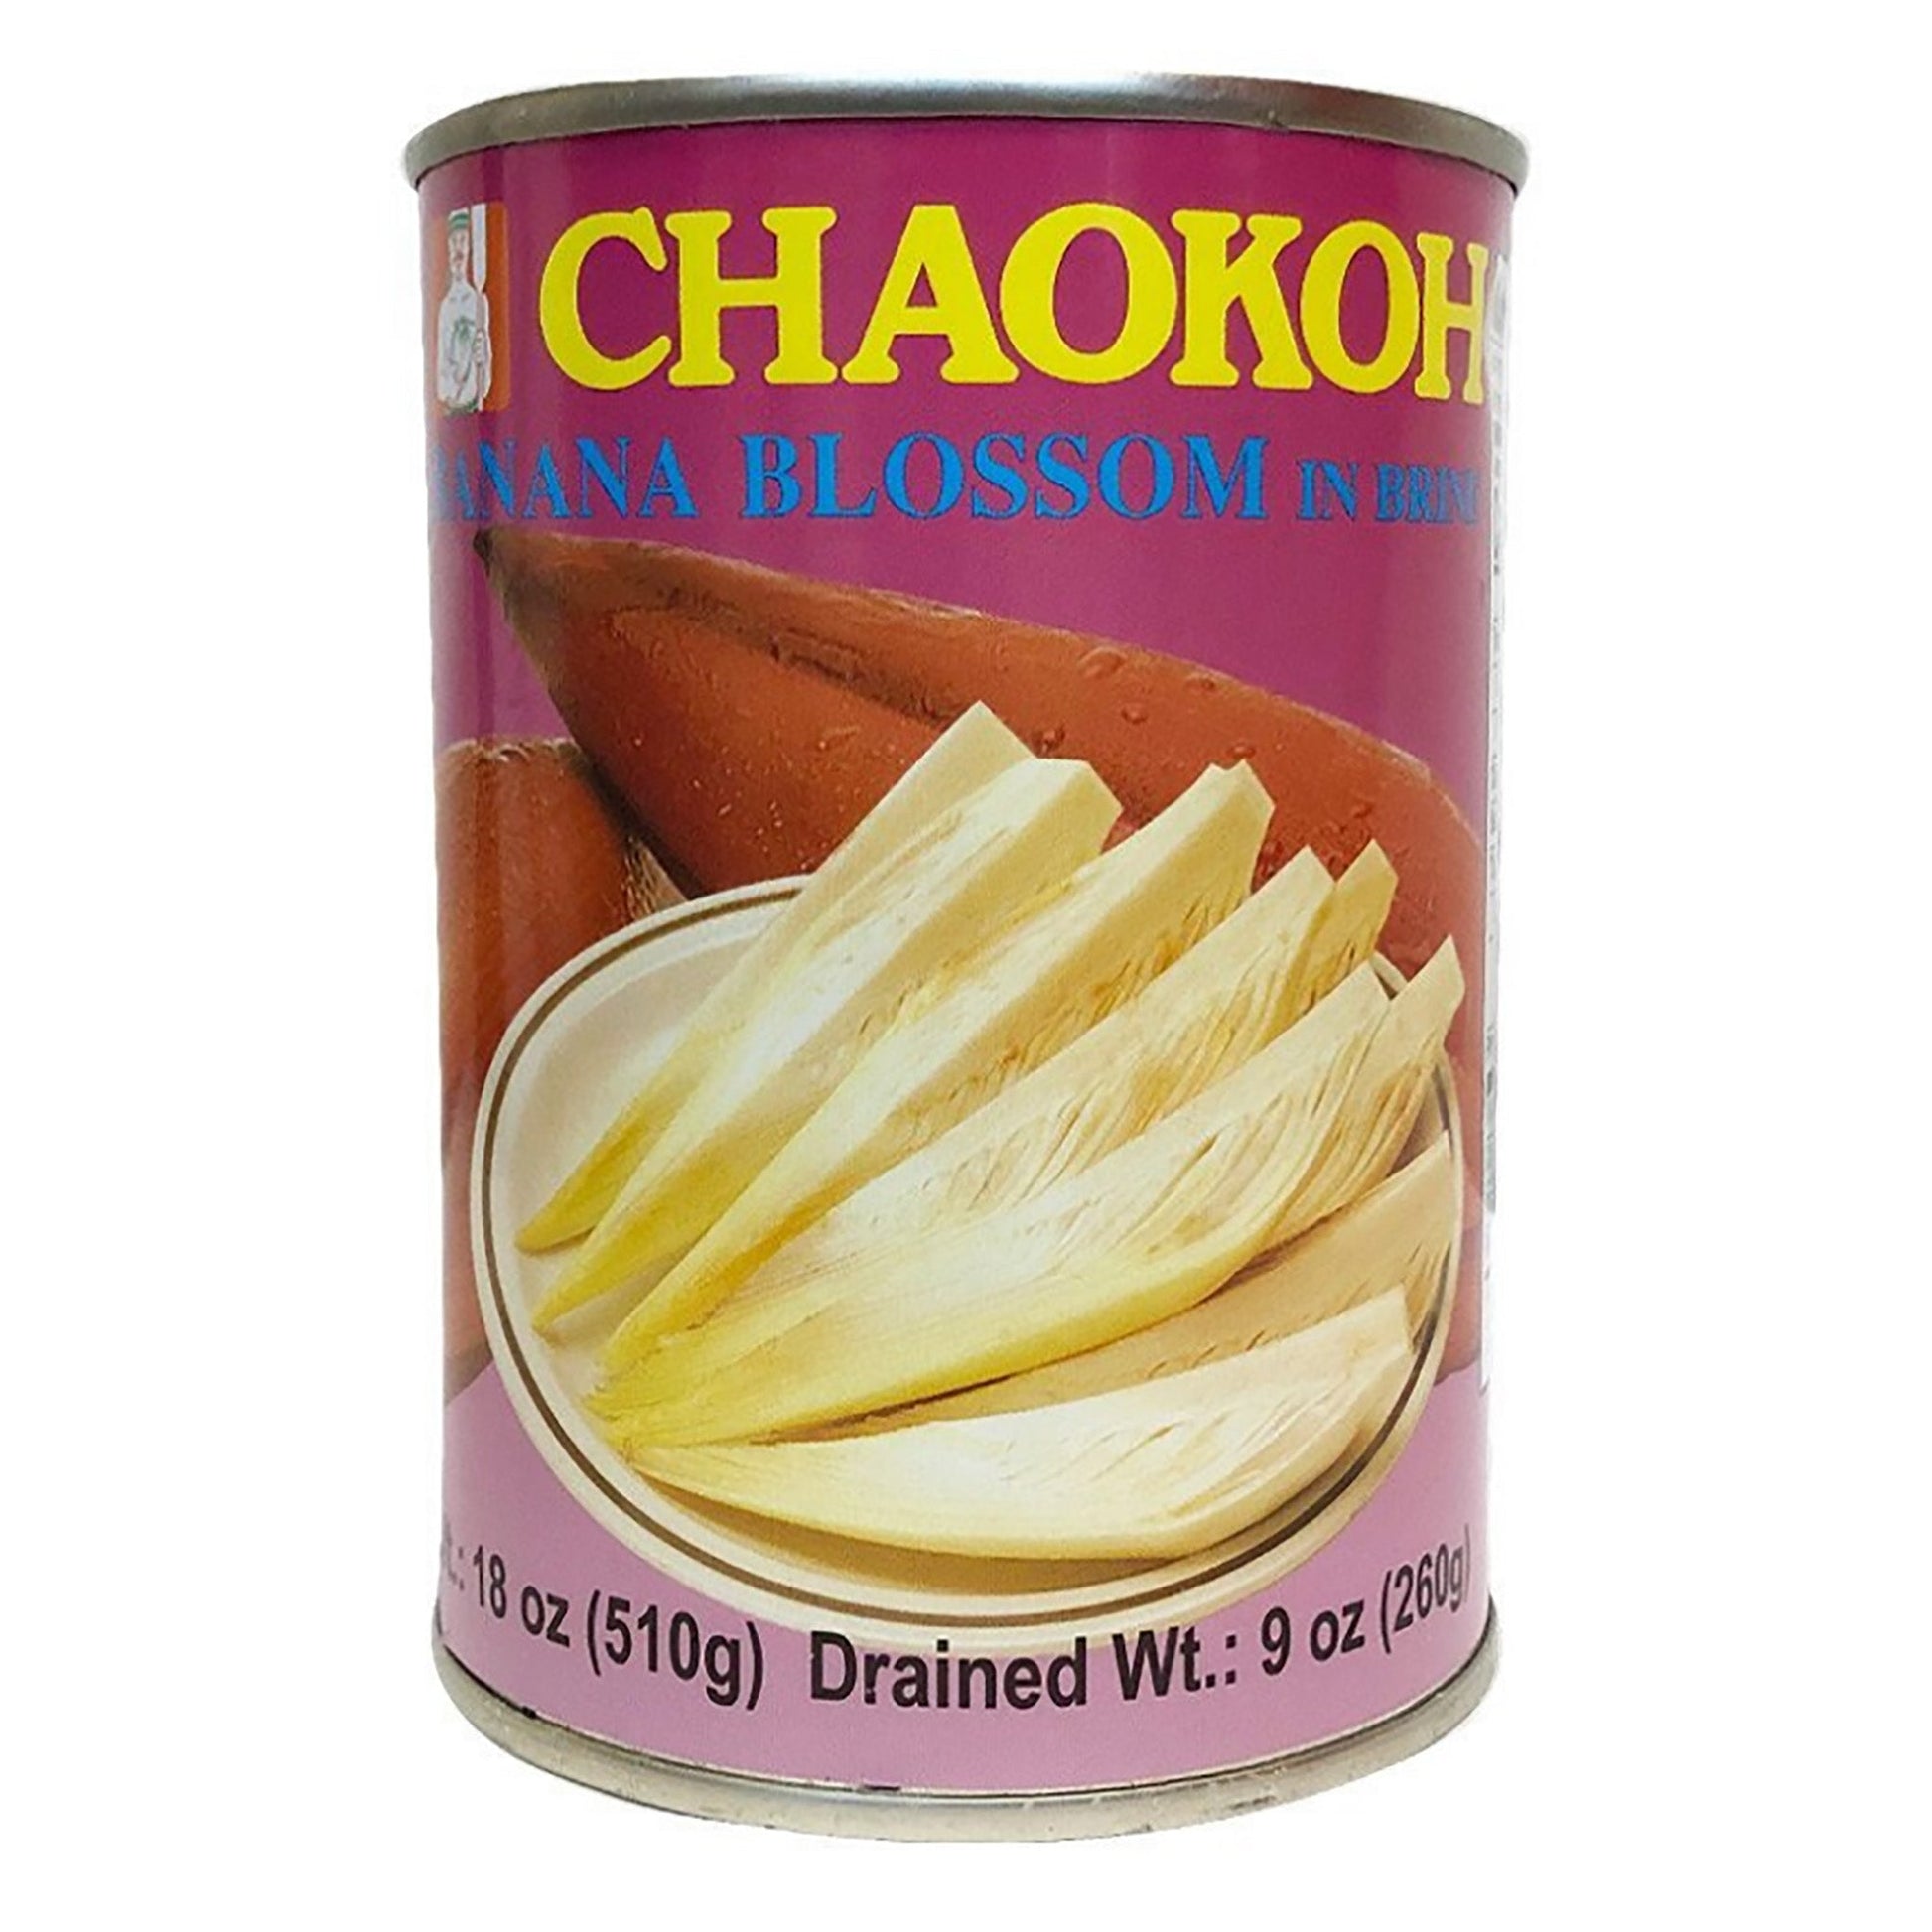 Front graphic image of Chaokoh Banana Blossom In Brine 18oz